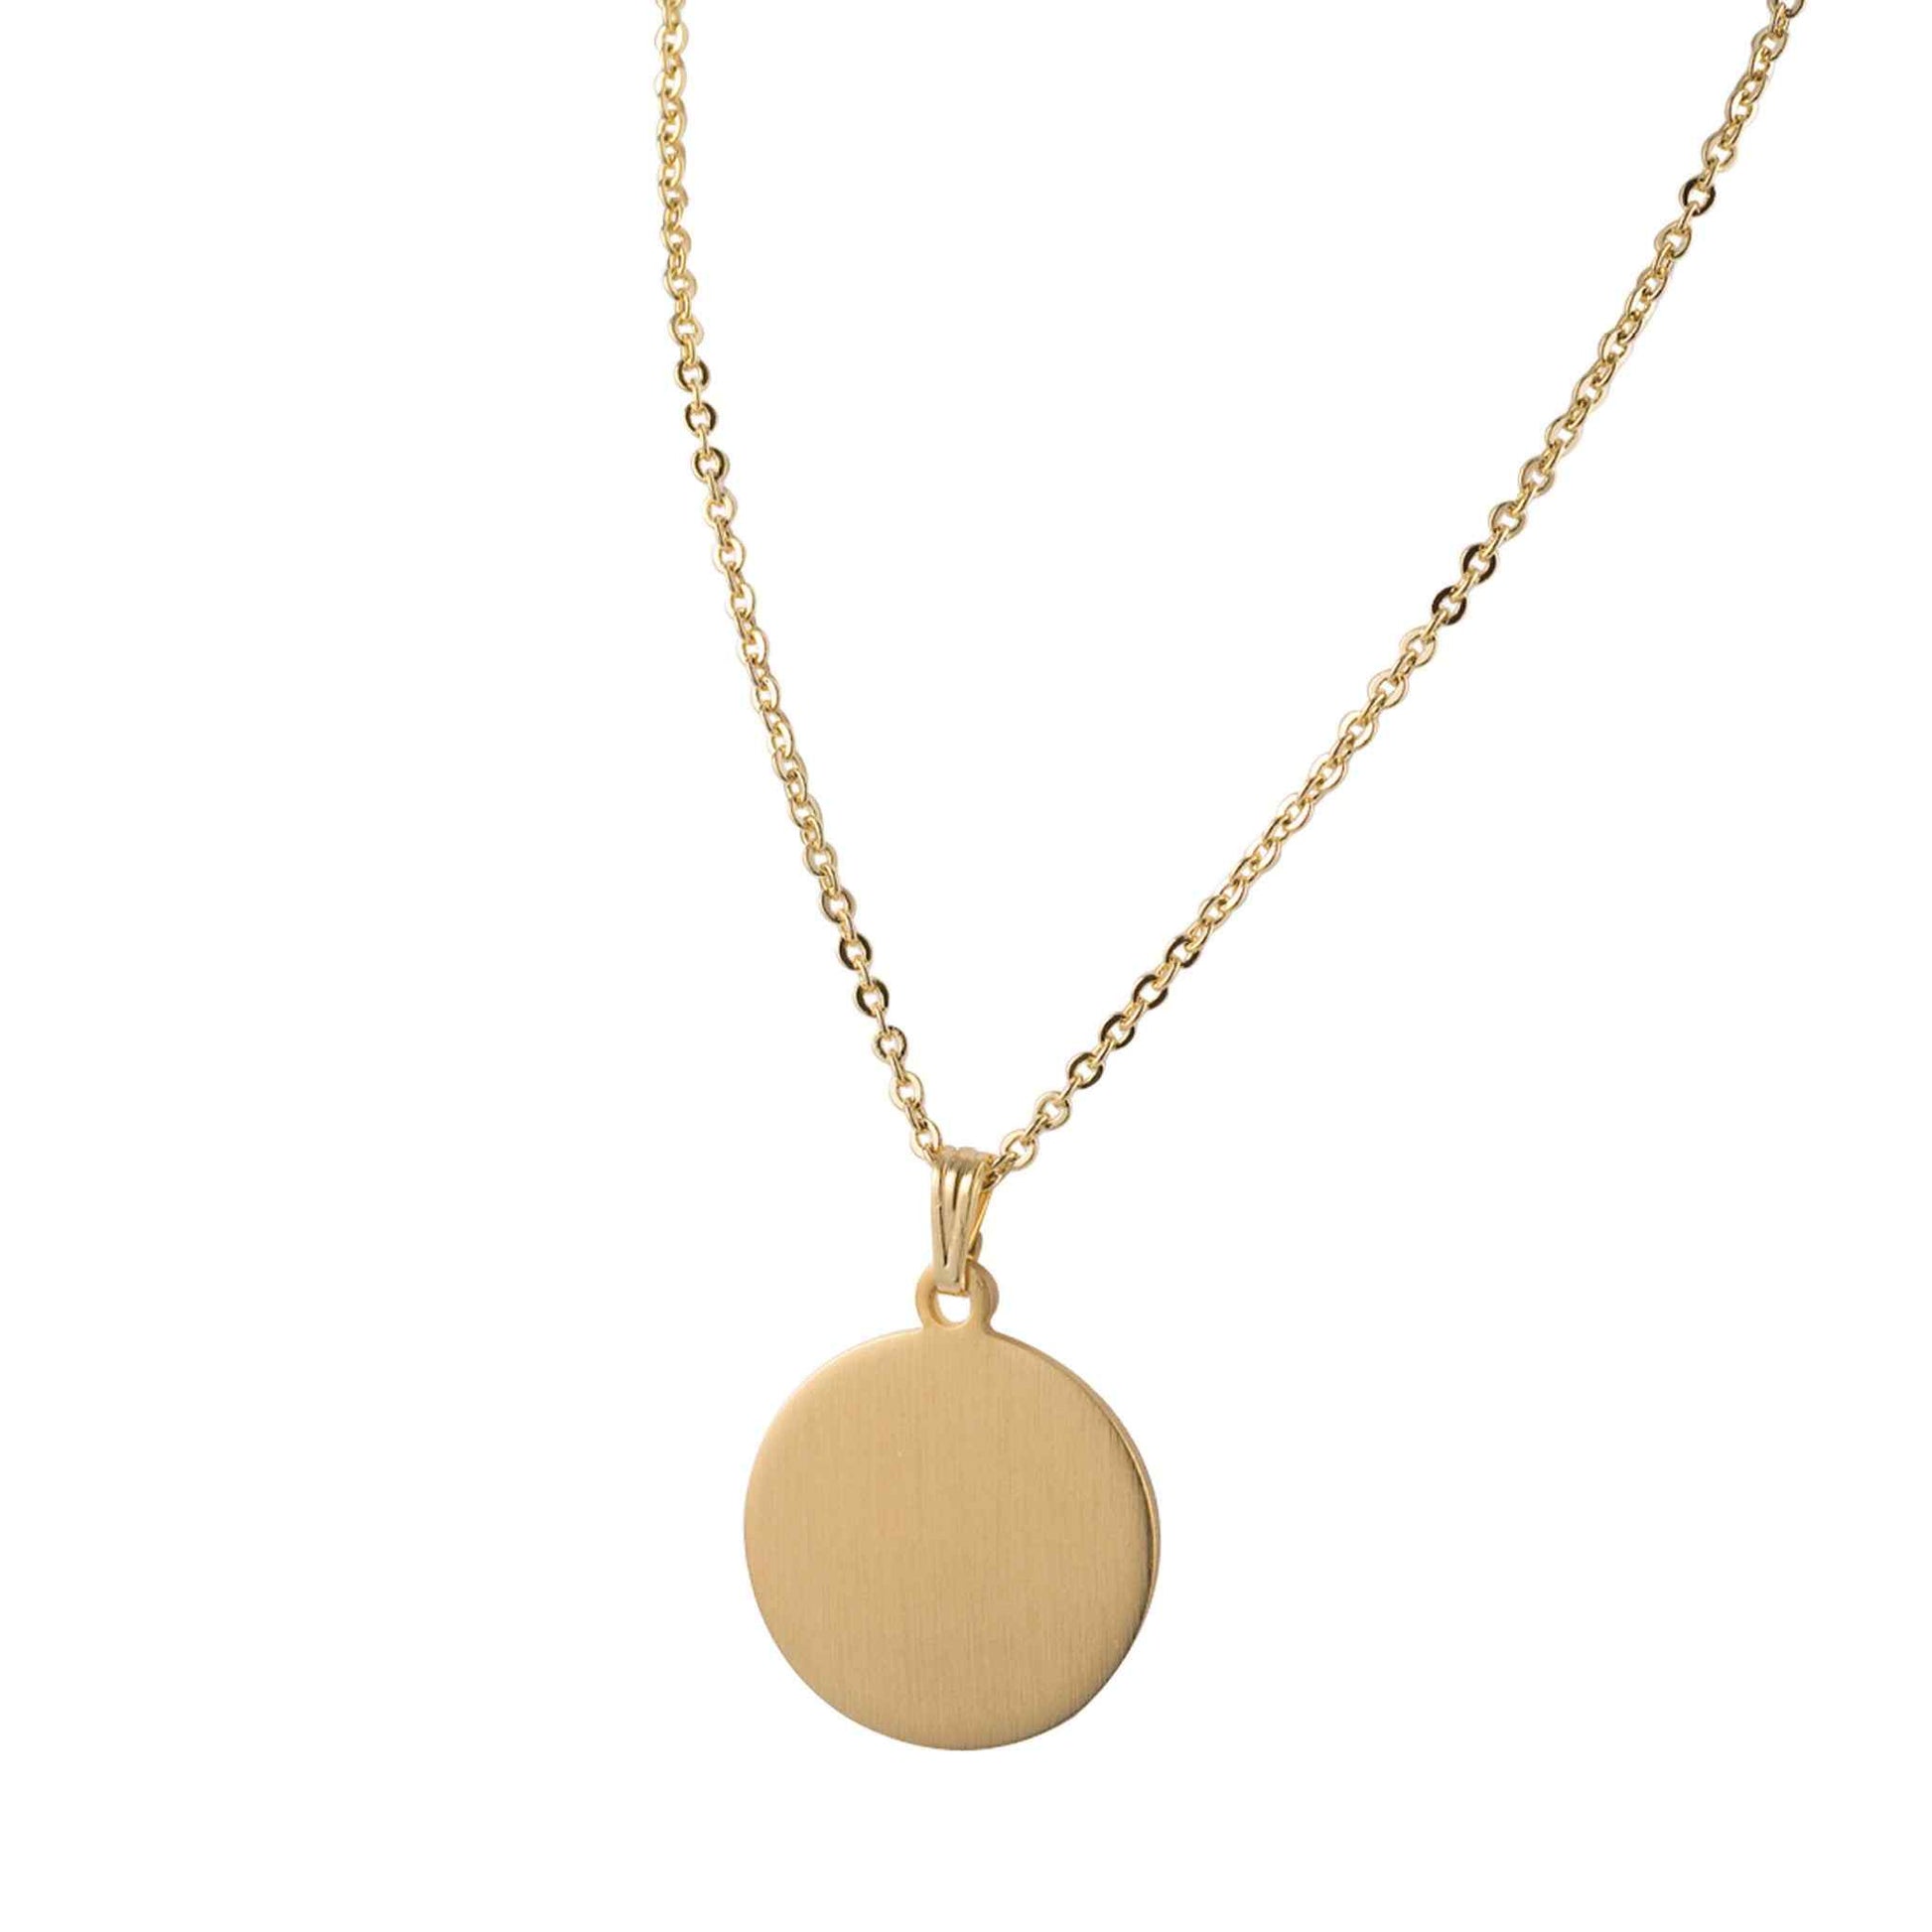 A round necklace displayed on a neutral white background.